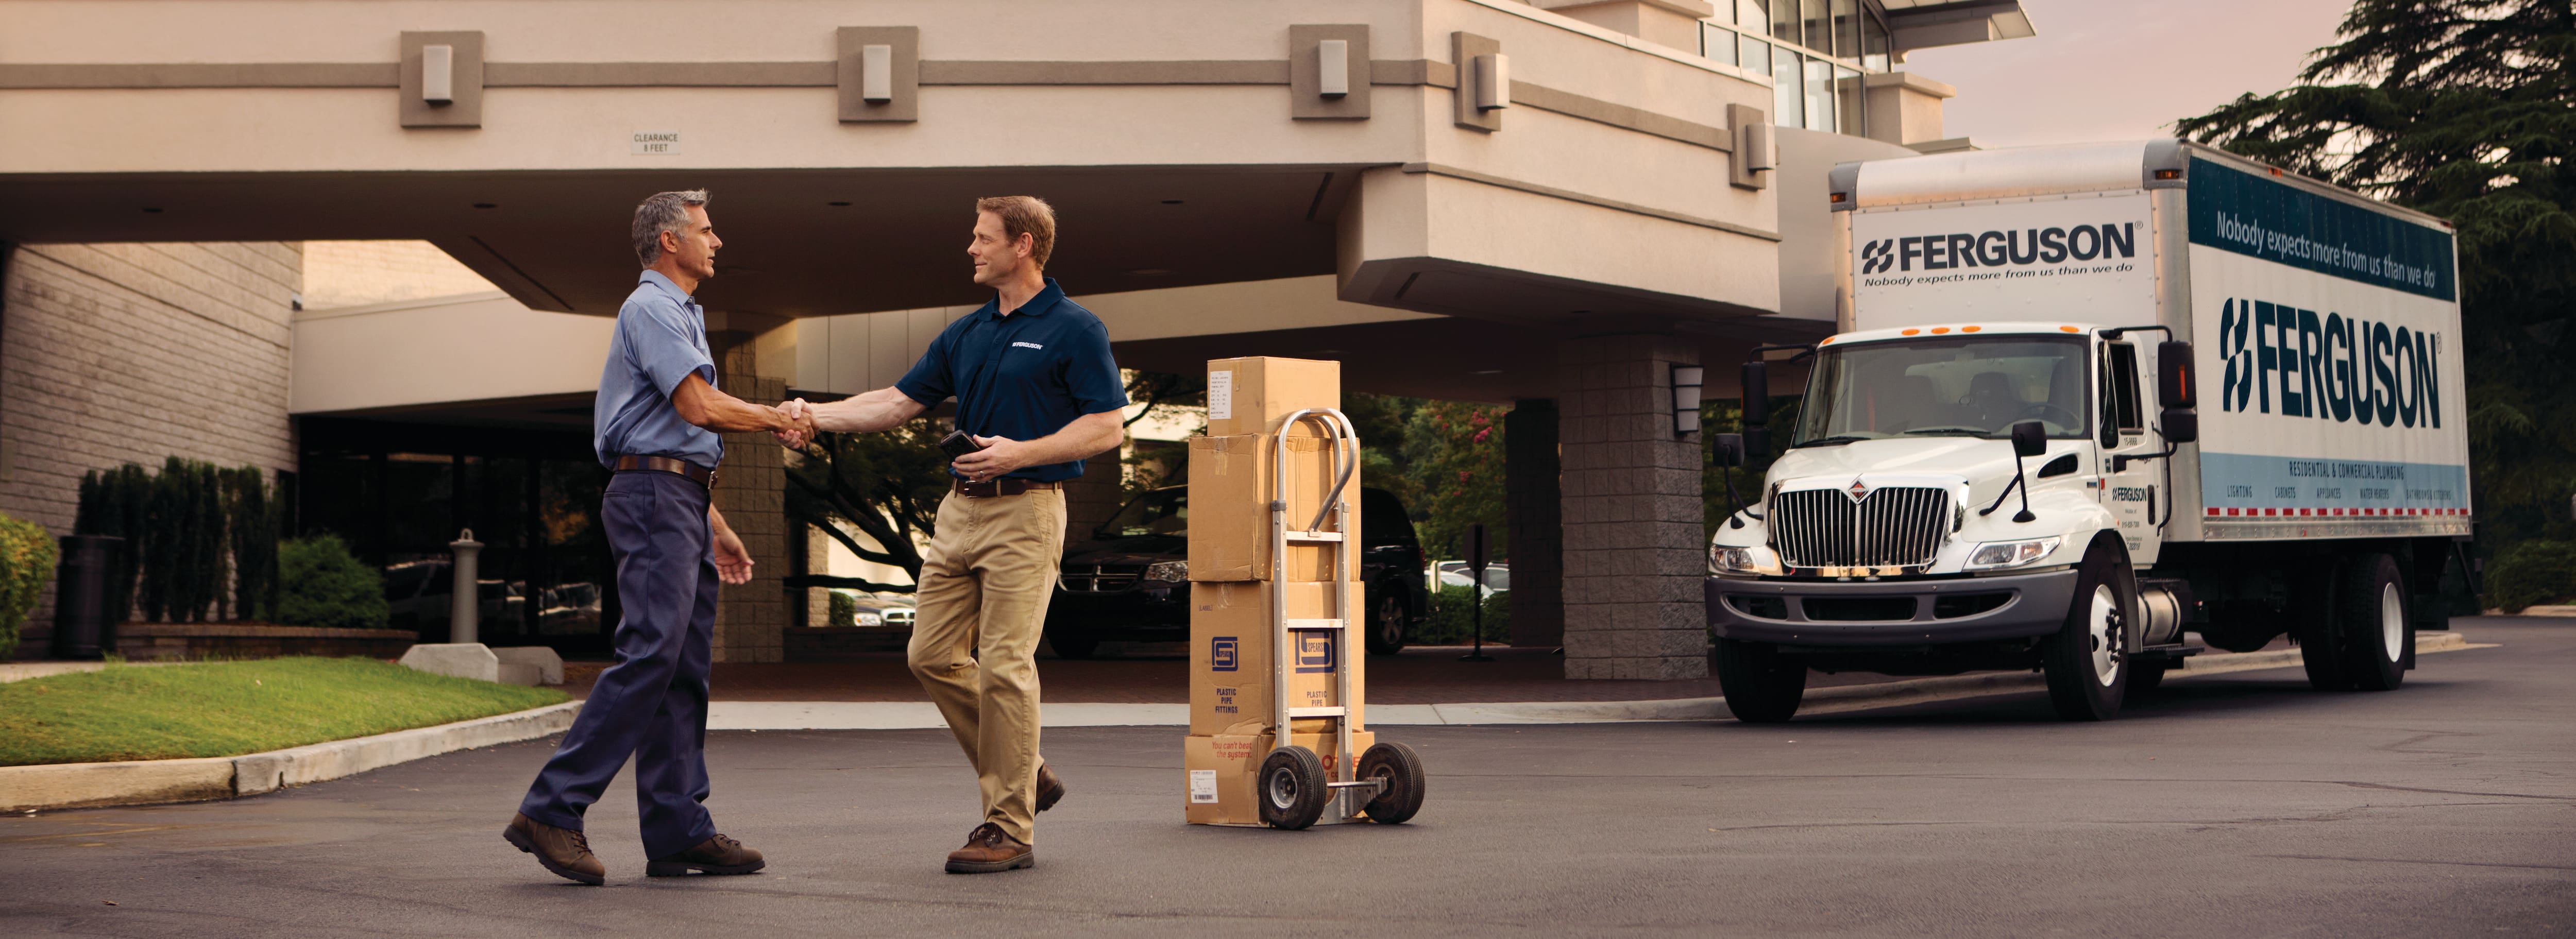 A Ferguson associate shakes hands with a hospitality manager in front of a hotel. A Ferguson truck and a dolly with Ferguson packages are behind the pair.